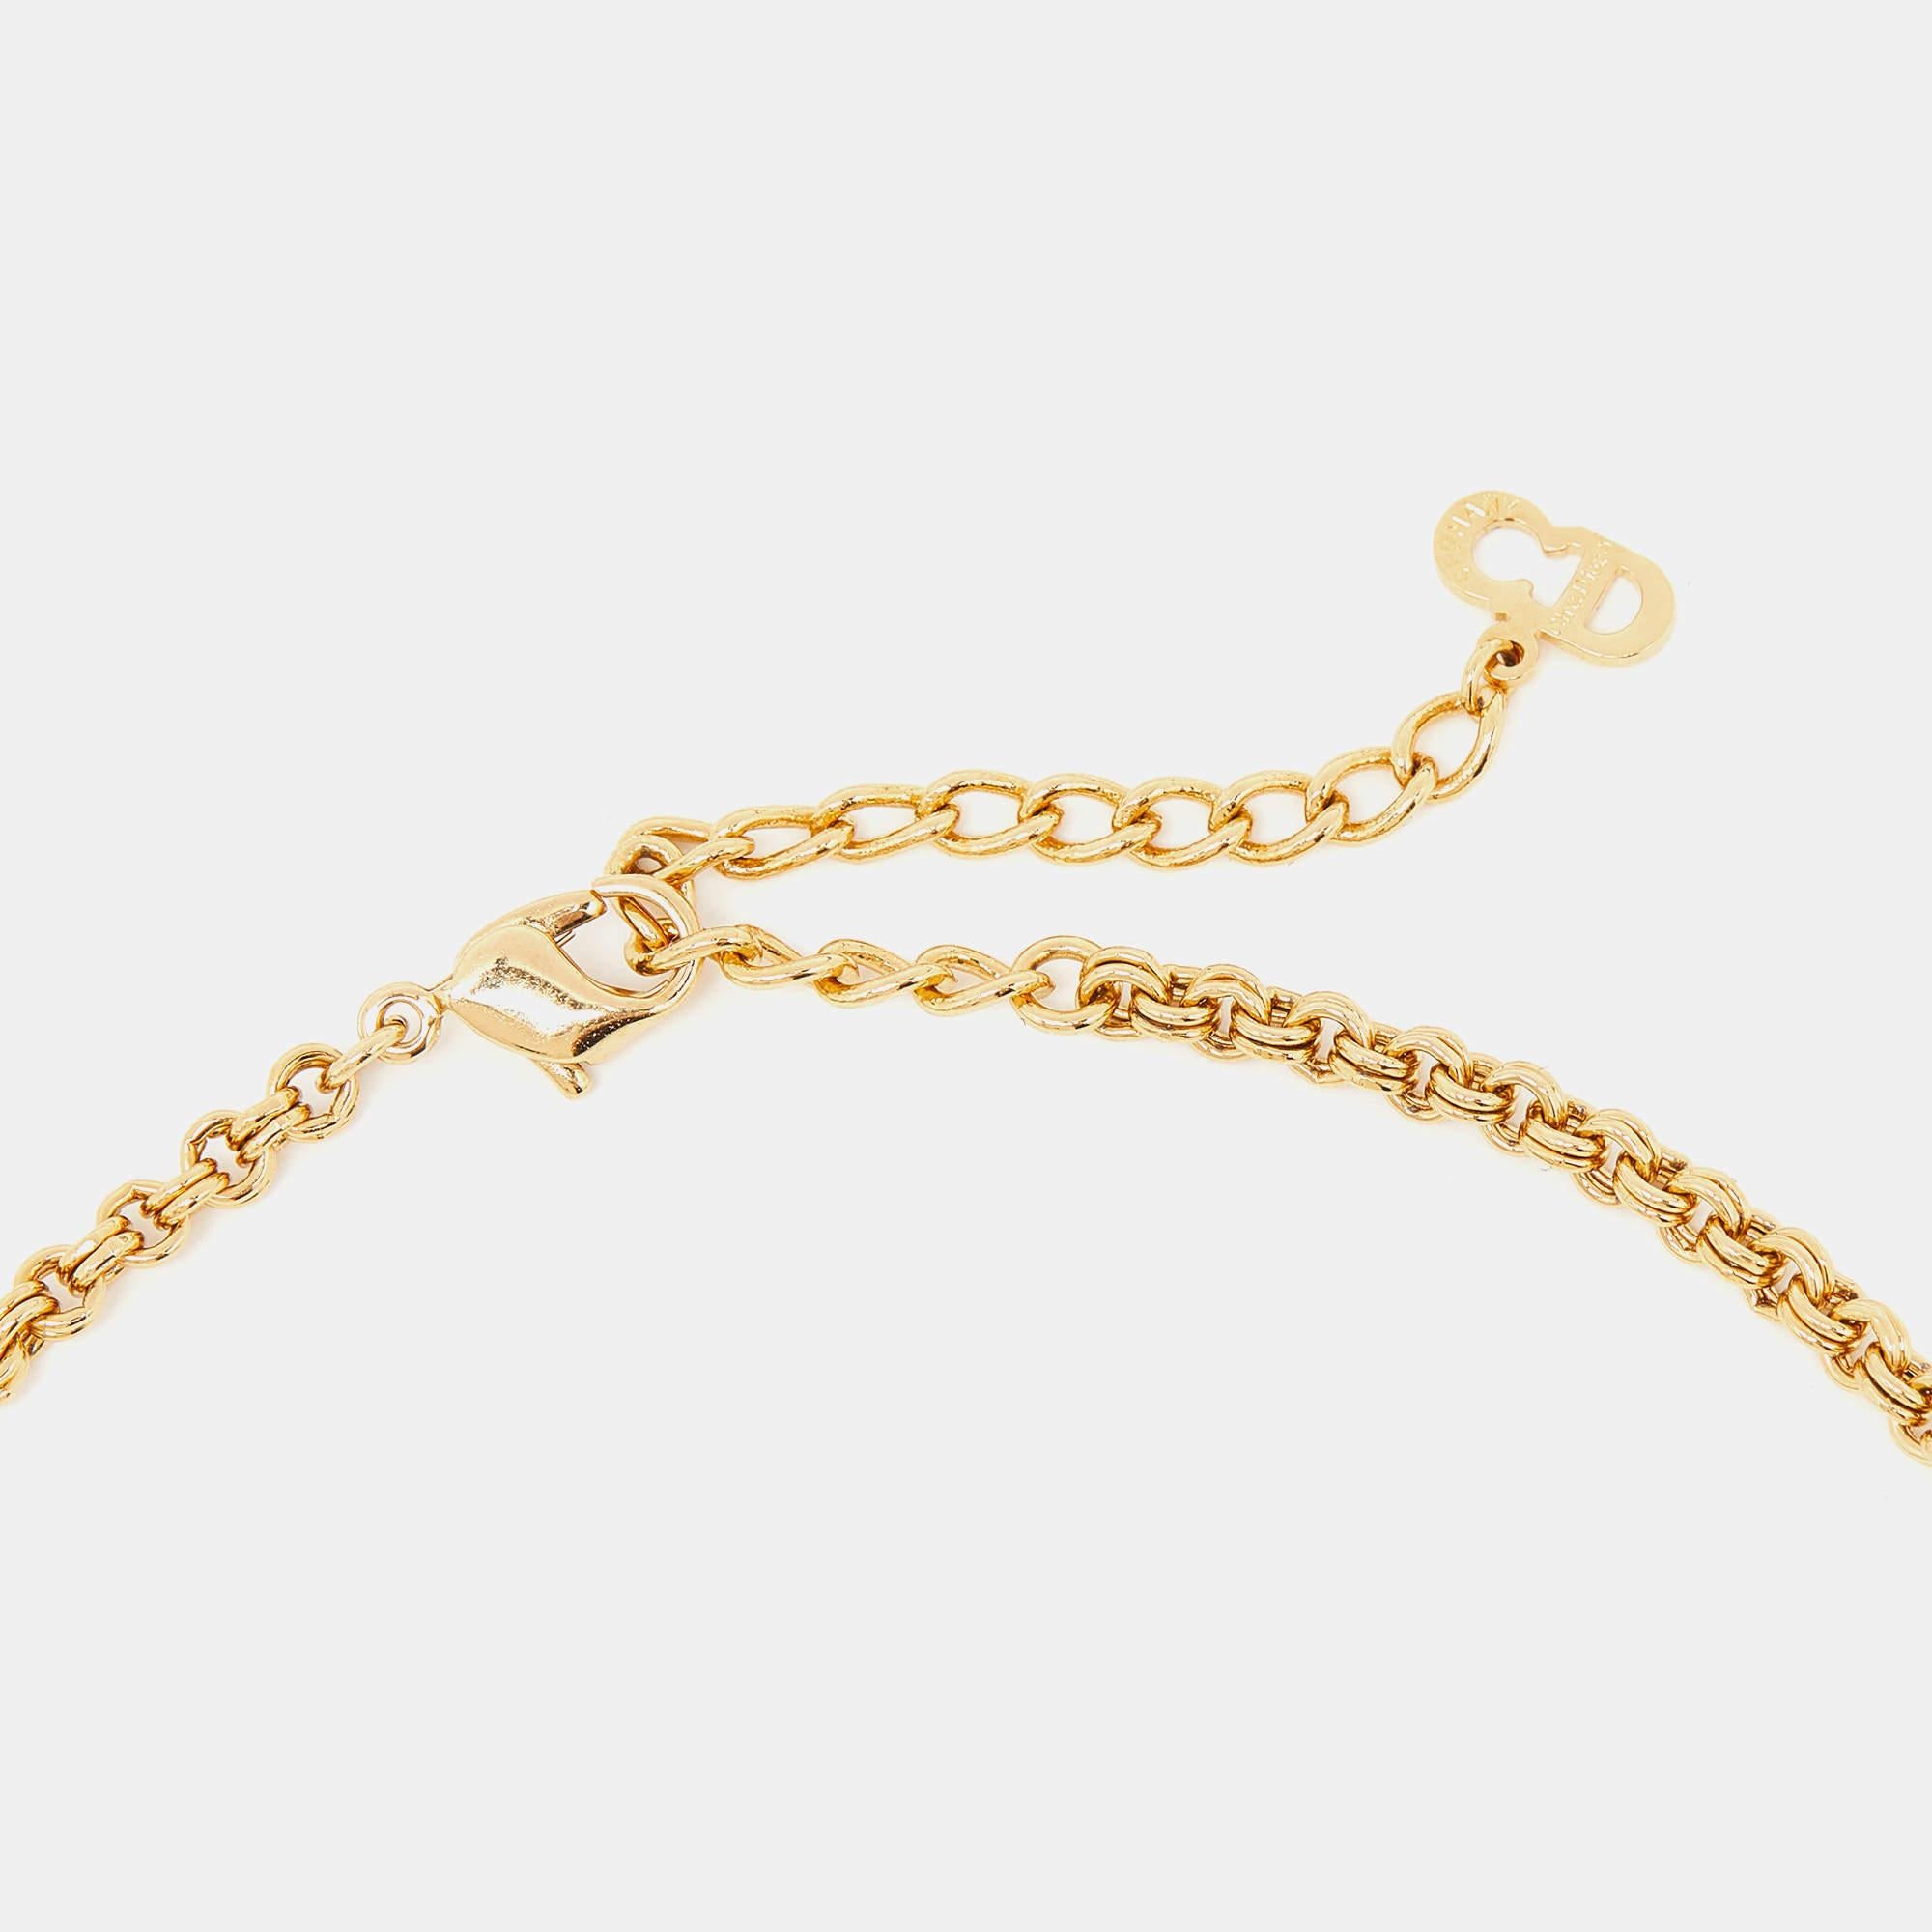 Adorn yourself with the timeless elegance of the Christian Dior vintage necklace. Crafted with meticulous attention to detail, this exquisite piece features a lustrous gold tone chain adorned with dazzling rhinestones, exuding a sense of opulence